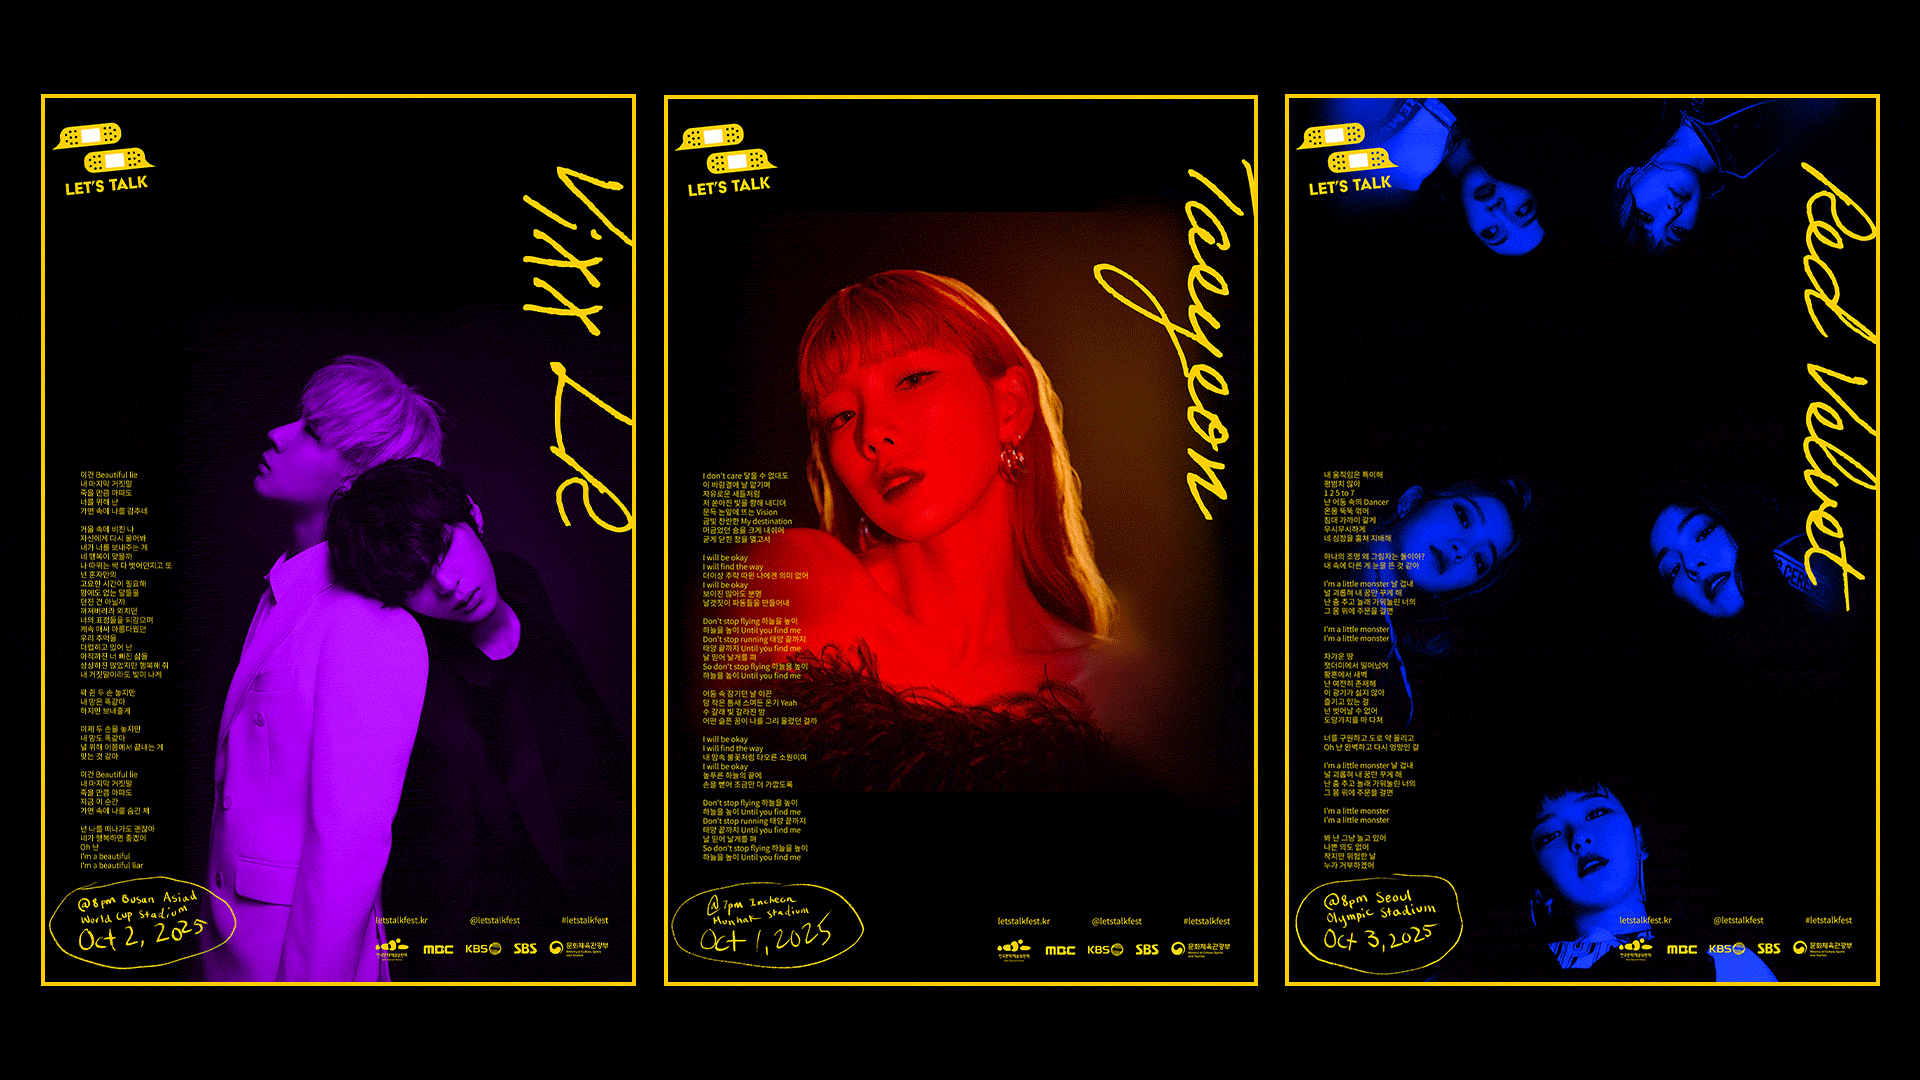 A series of Augmented Reality poster designs branded for a K-pop music festival held in South Korea called Let’s Talk that focuses on mental health. The music festival incorporates K-pop songs and lyrics written by the artists themselves that showcase their inner mental health issues that are often unseen from the outside. The posters feature Taeyeon from Girls’ Generation, Vixx LR’s Leo and Ravi, and Red Velvet’s Joy, Yeri, Irene, Wendy, and Seulgi.